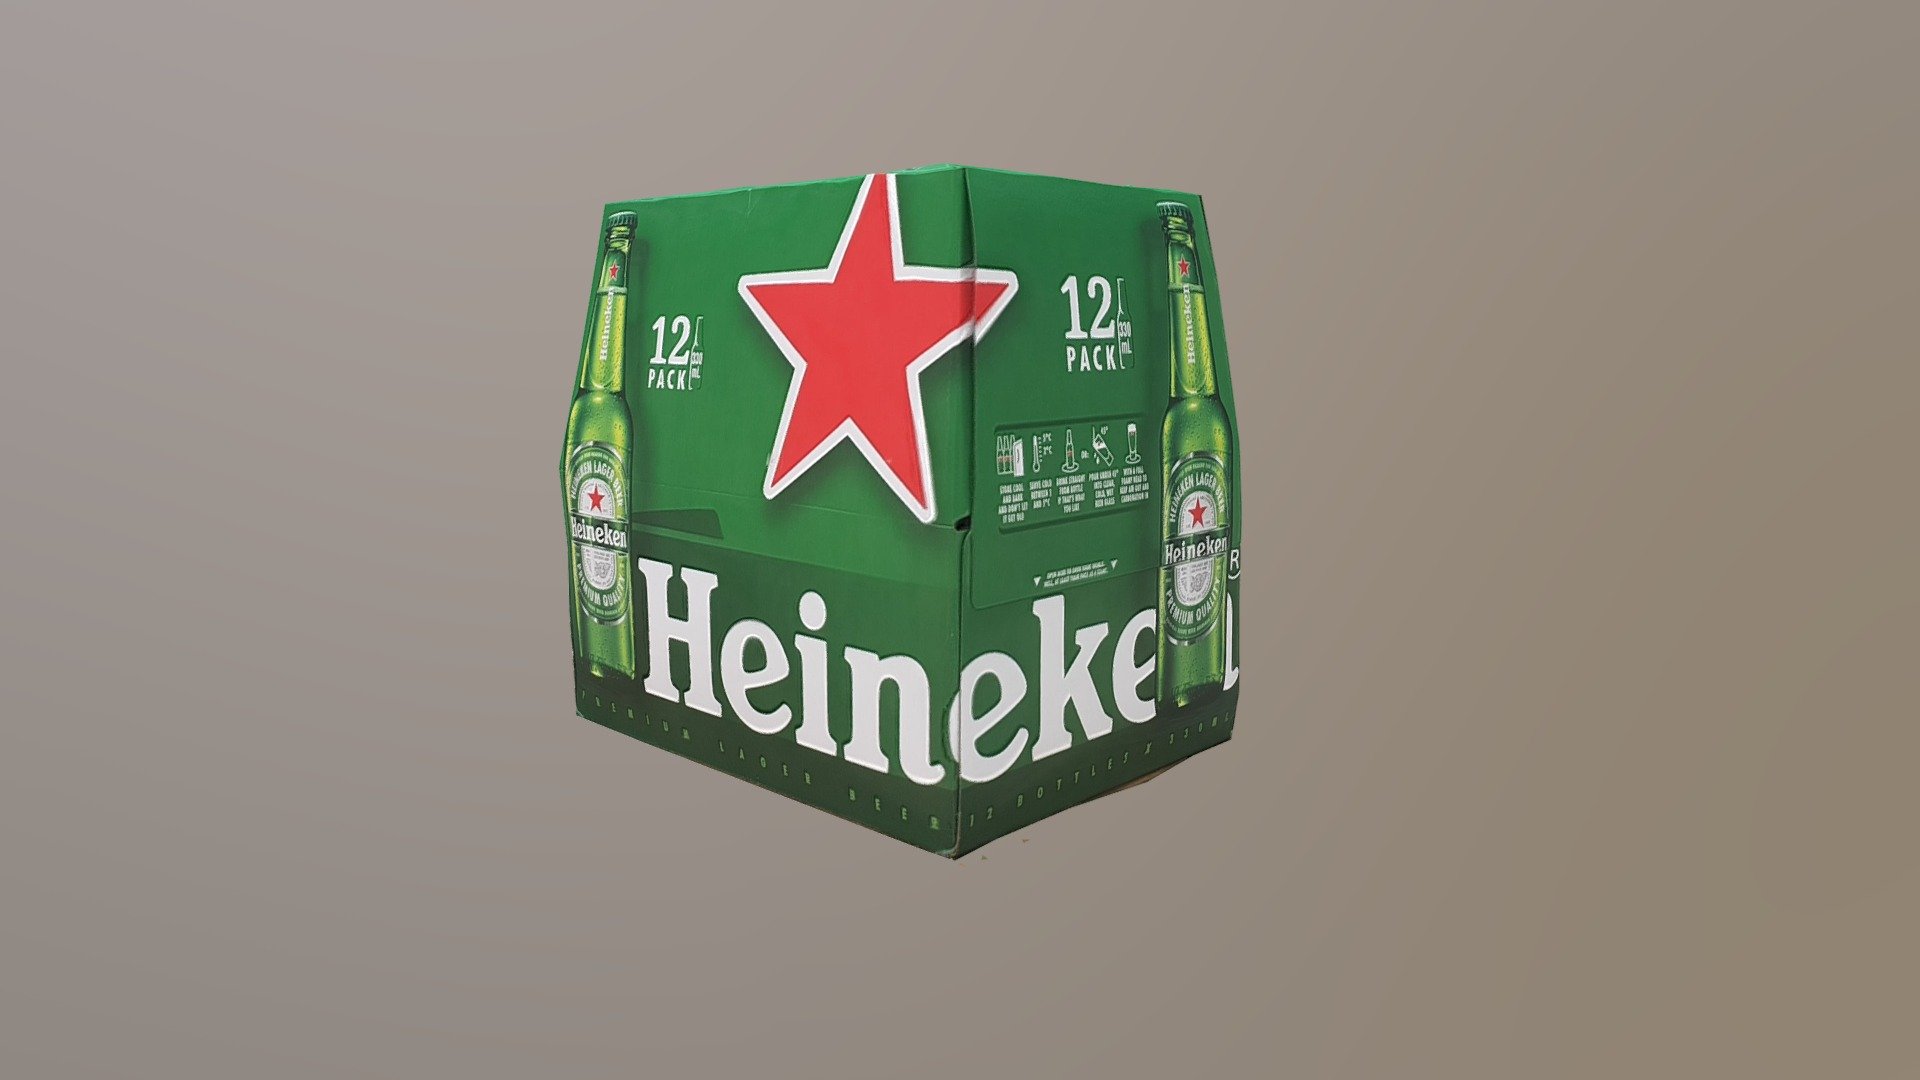 Created in RealityCapture by Capturing Reality from 89 images in 00h:22m:43s.

Box of Beer (Heineken 12 Pack) - Heineken Box of Beer 12 Pack - Buy Royalty Free 3D model by badradio 3d model